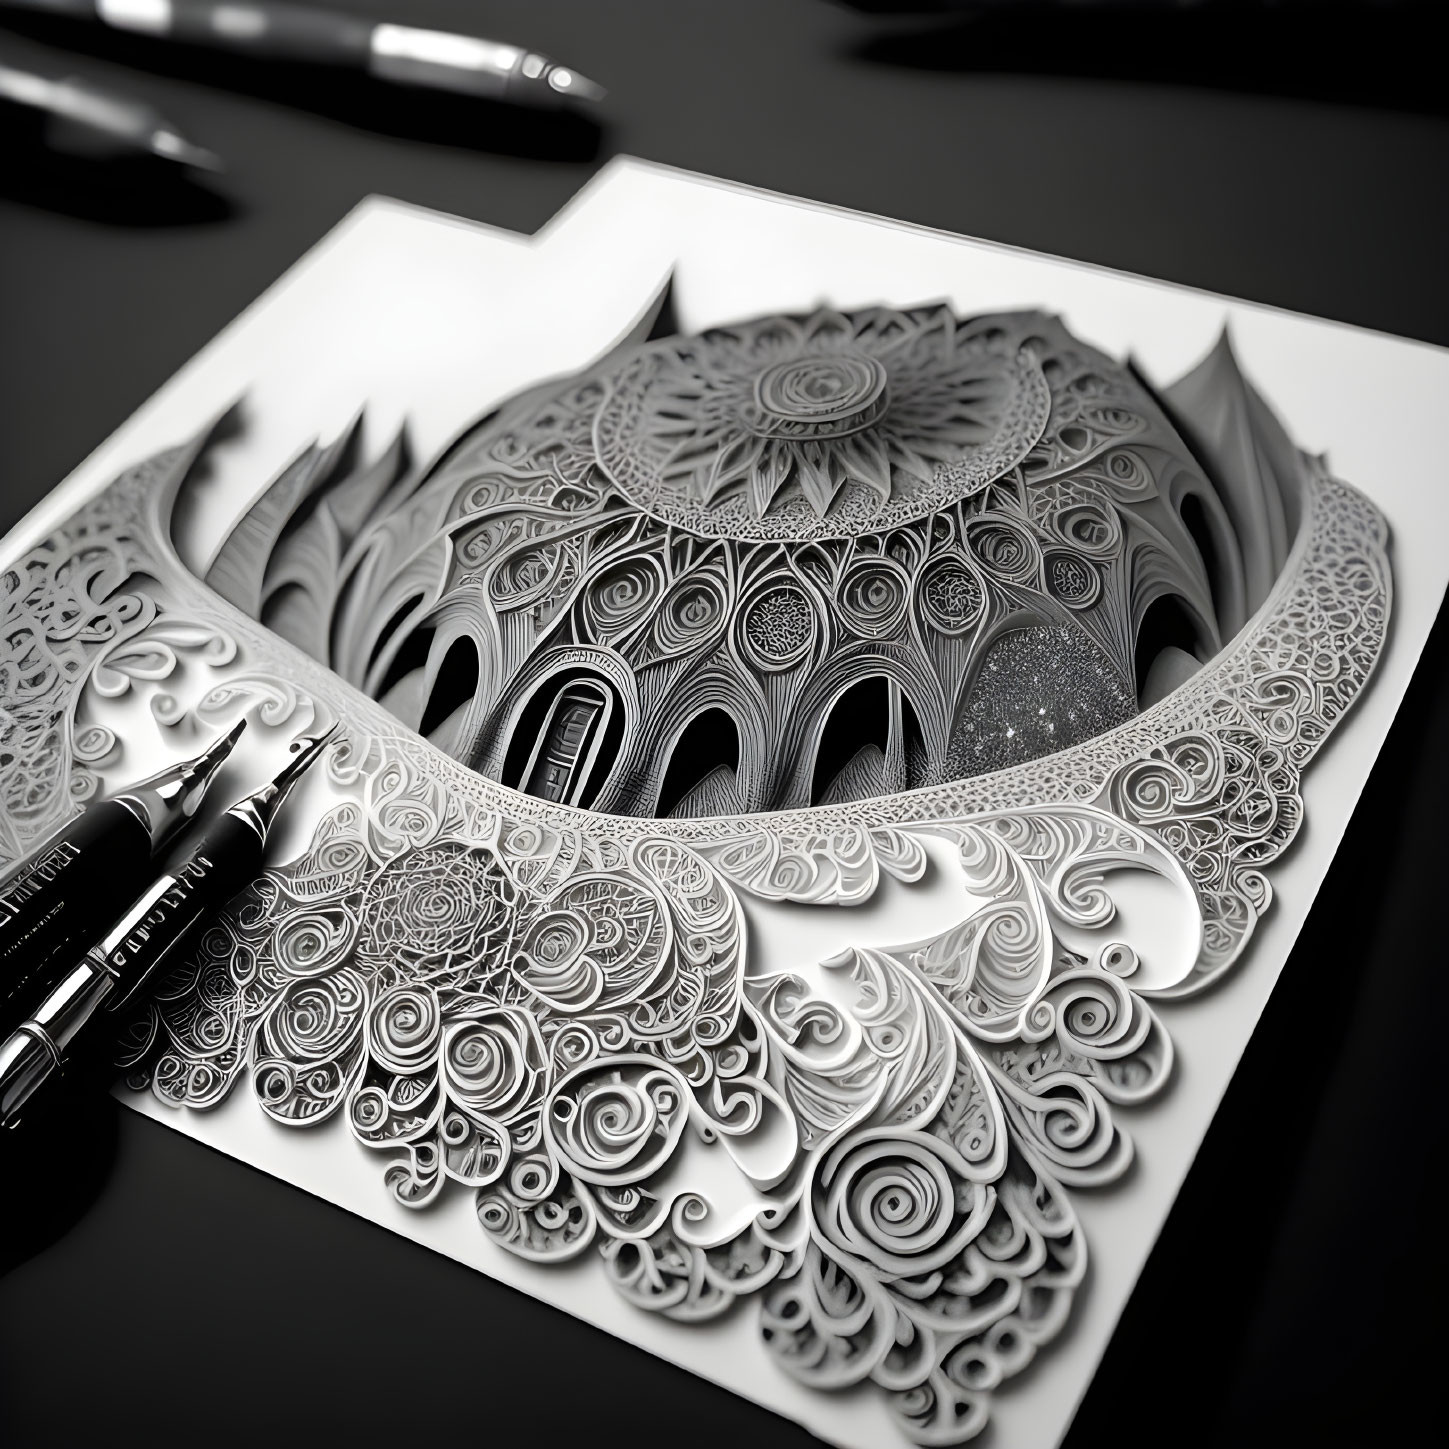 Detailed Black and White 3D Illustration of Ornate Architectural Dome with Drawing Pens